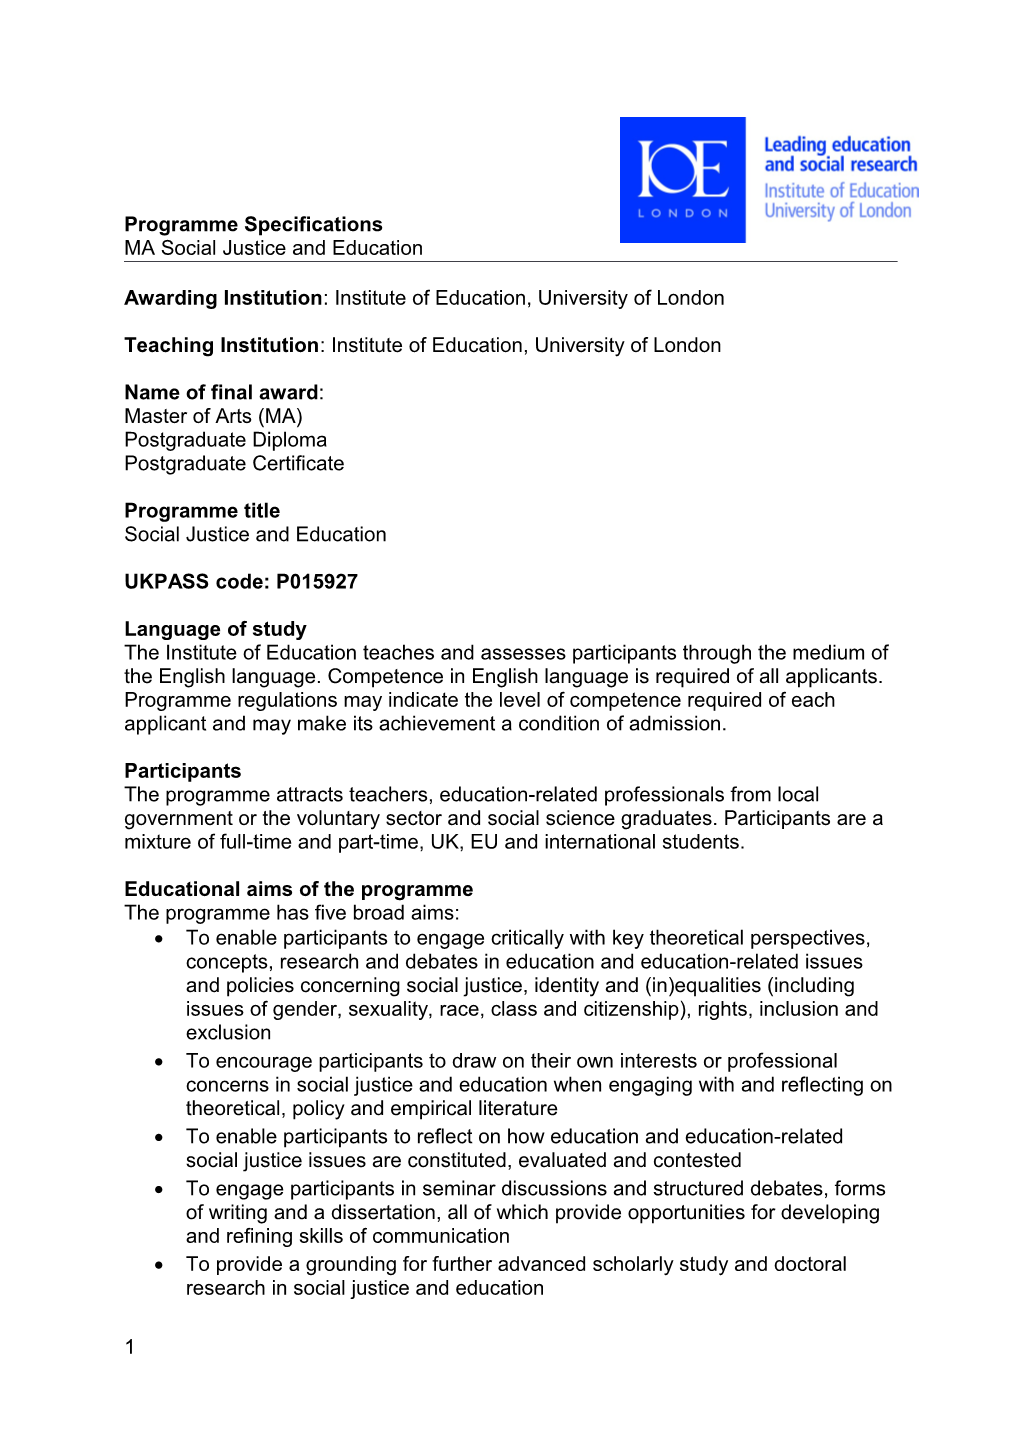 Programme Specification for the MA Geography in Education